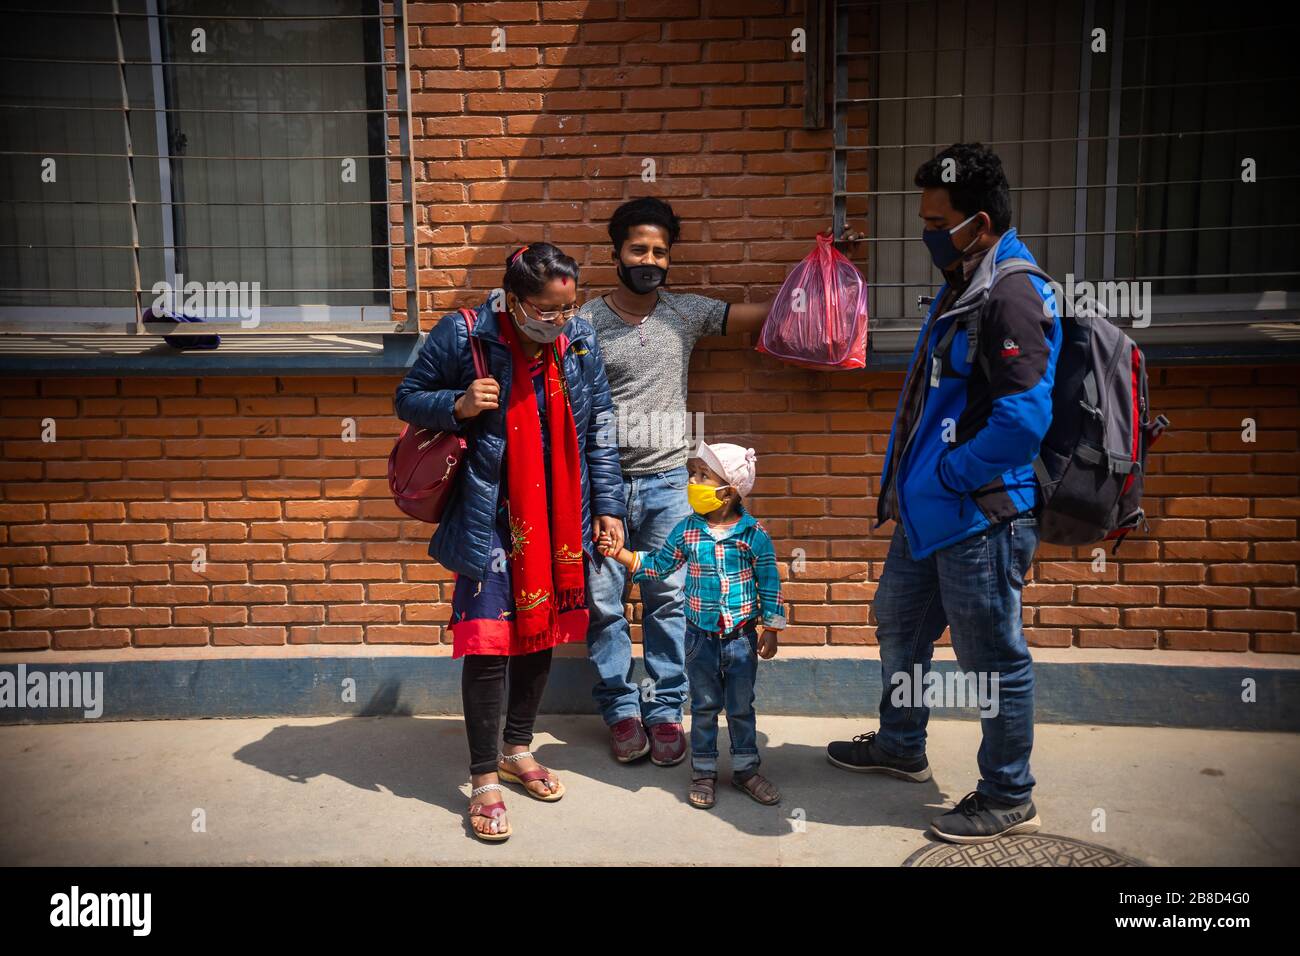 A family wearing medical masks as a preventive measure, waiting for tickets during the corona virus pandemic.Kathmandu's new bus park is crowded after government decides to halt long-tour vehicles amidst Covid-19 fears, effective from March 23 to March 31. The last three days saw over 500,000 leaving the capital. Stock Photo